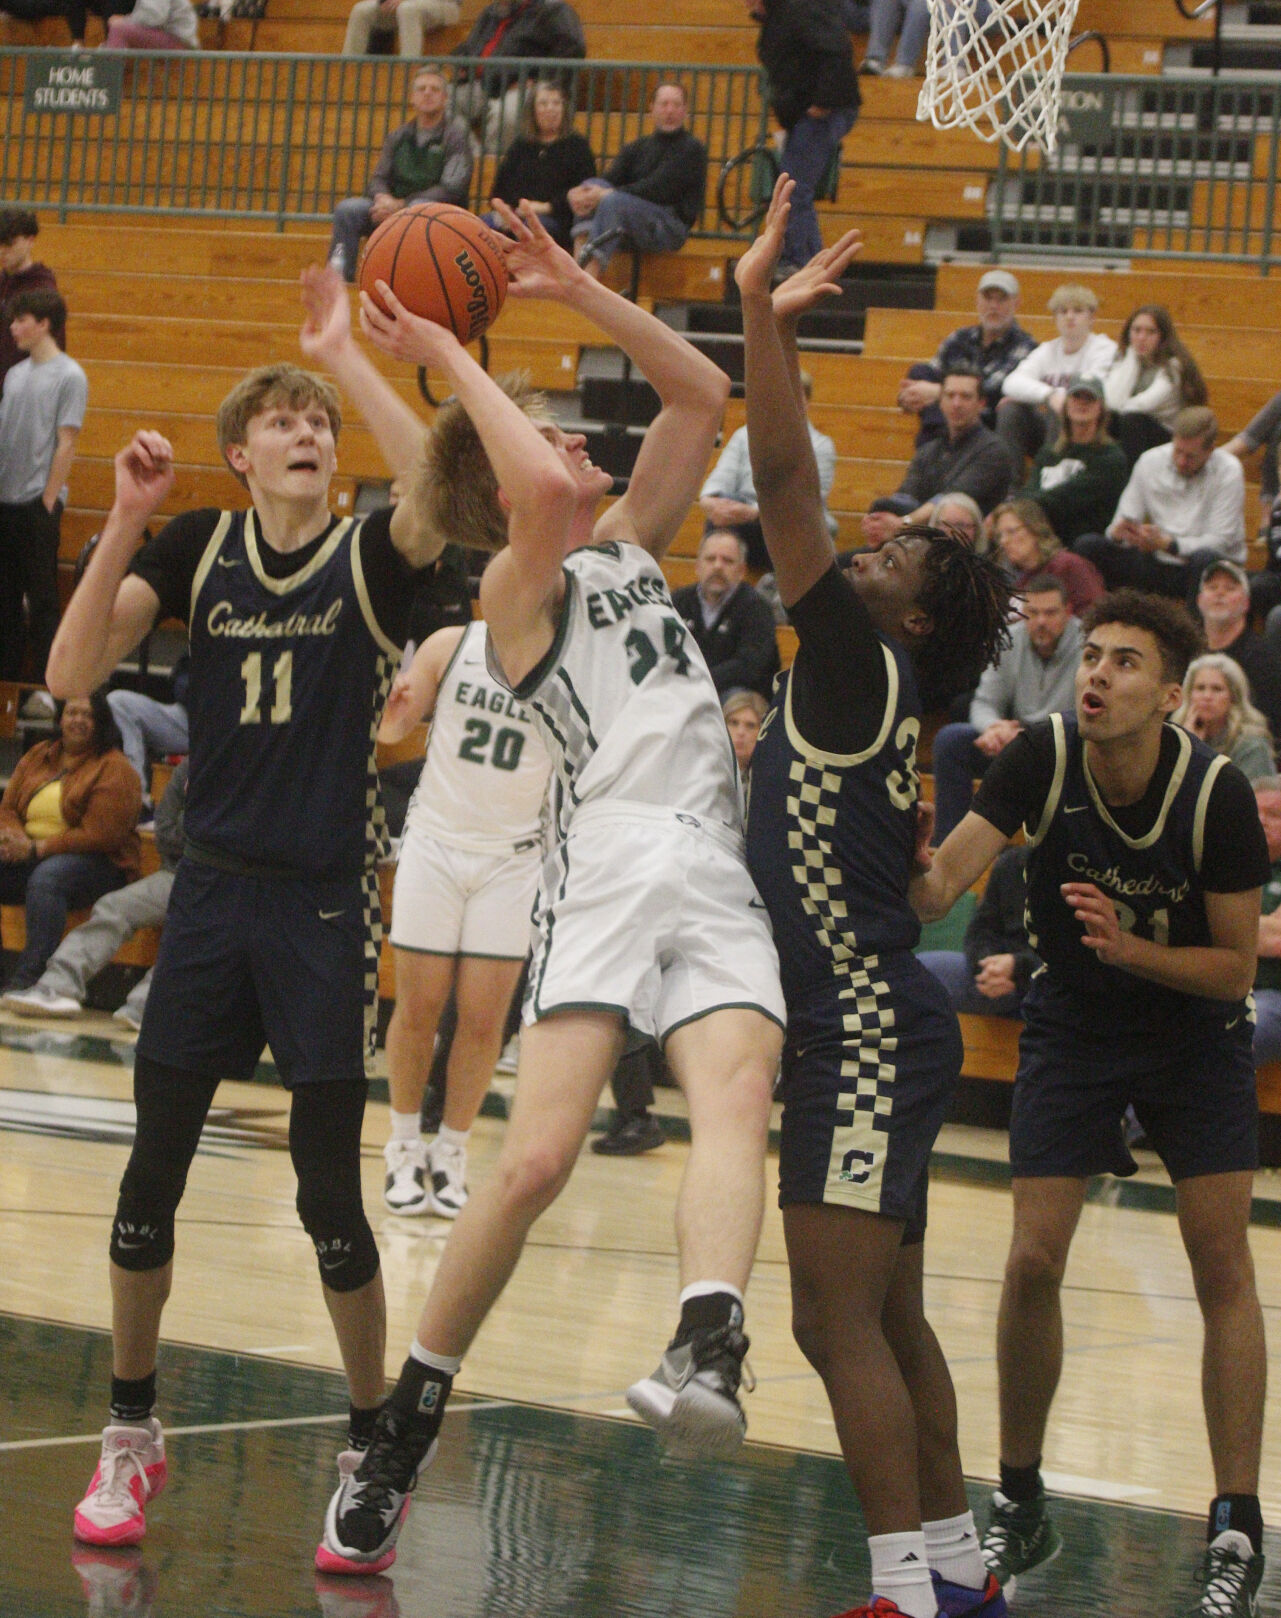 Zionsville Boys Basketball Falls to Cathedral 68-50 in Regular-Season Finale, Prepares for Noblesville Clash